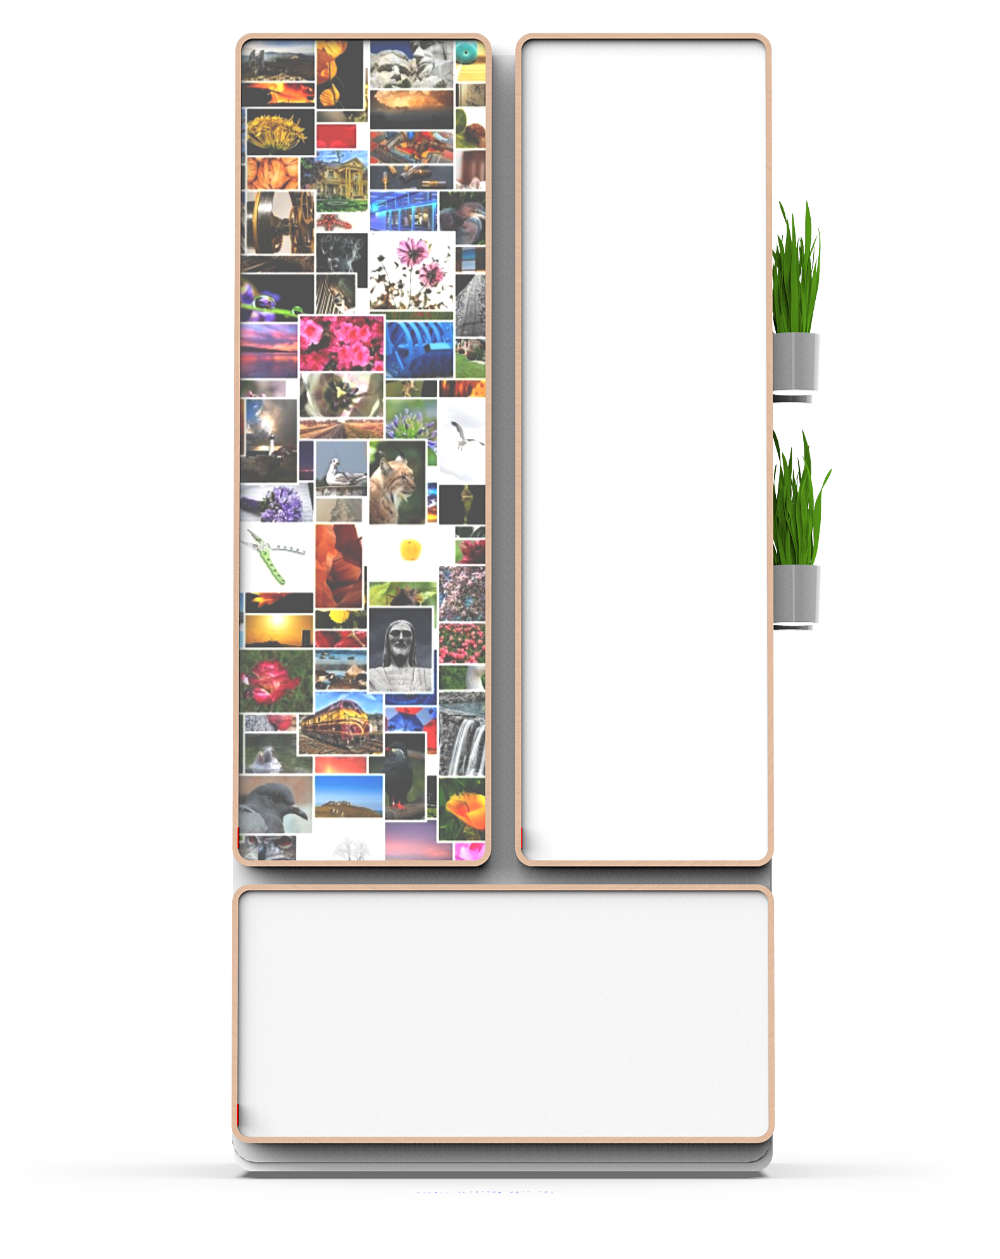 Refrigerator with photo wall